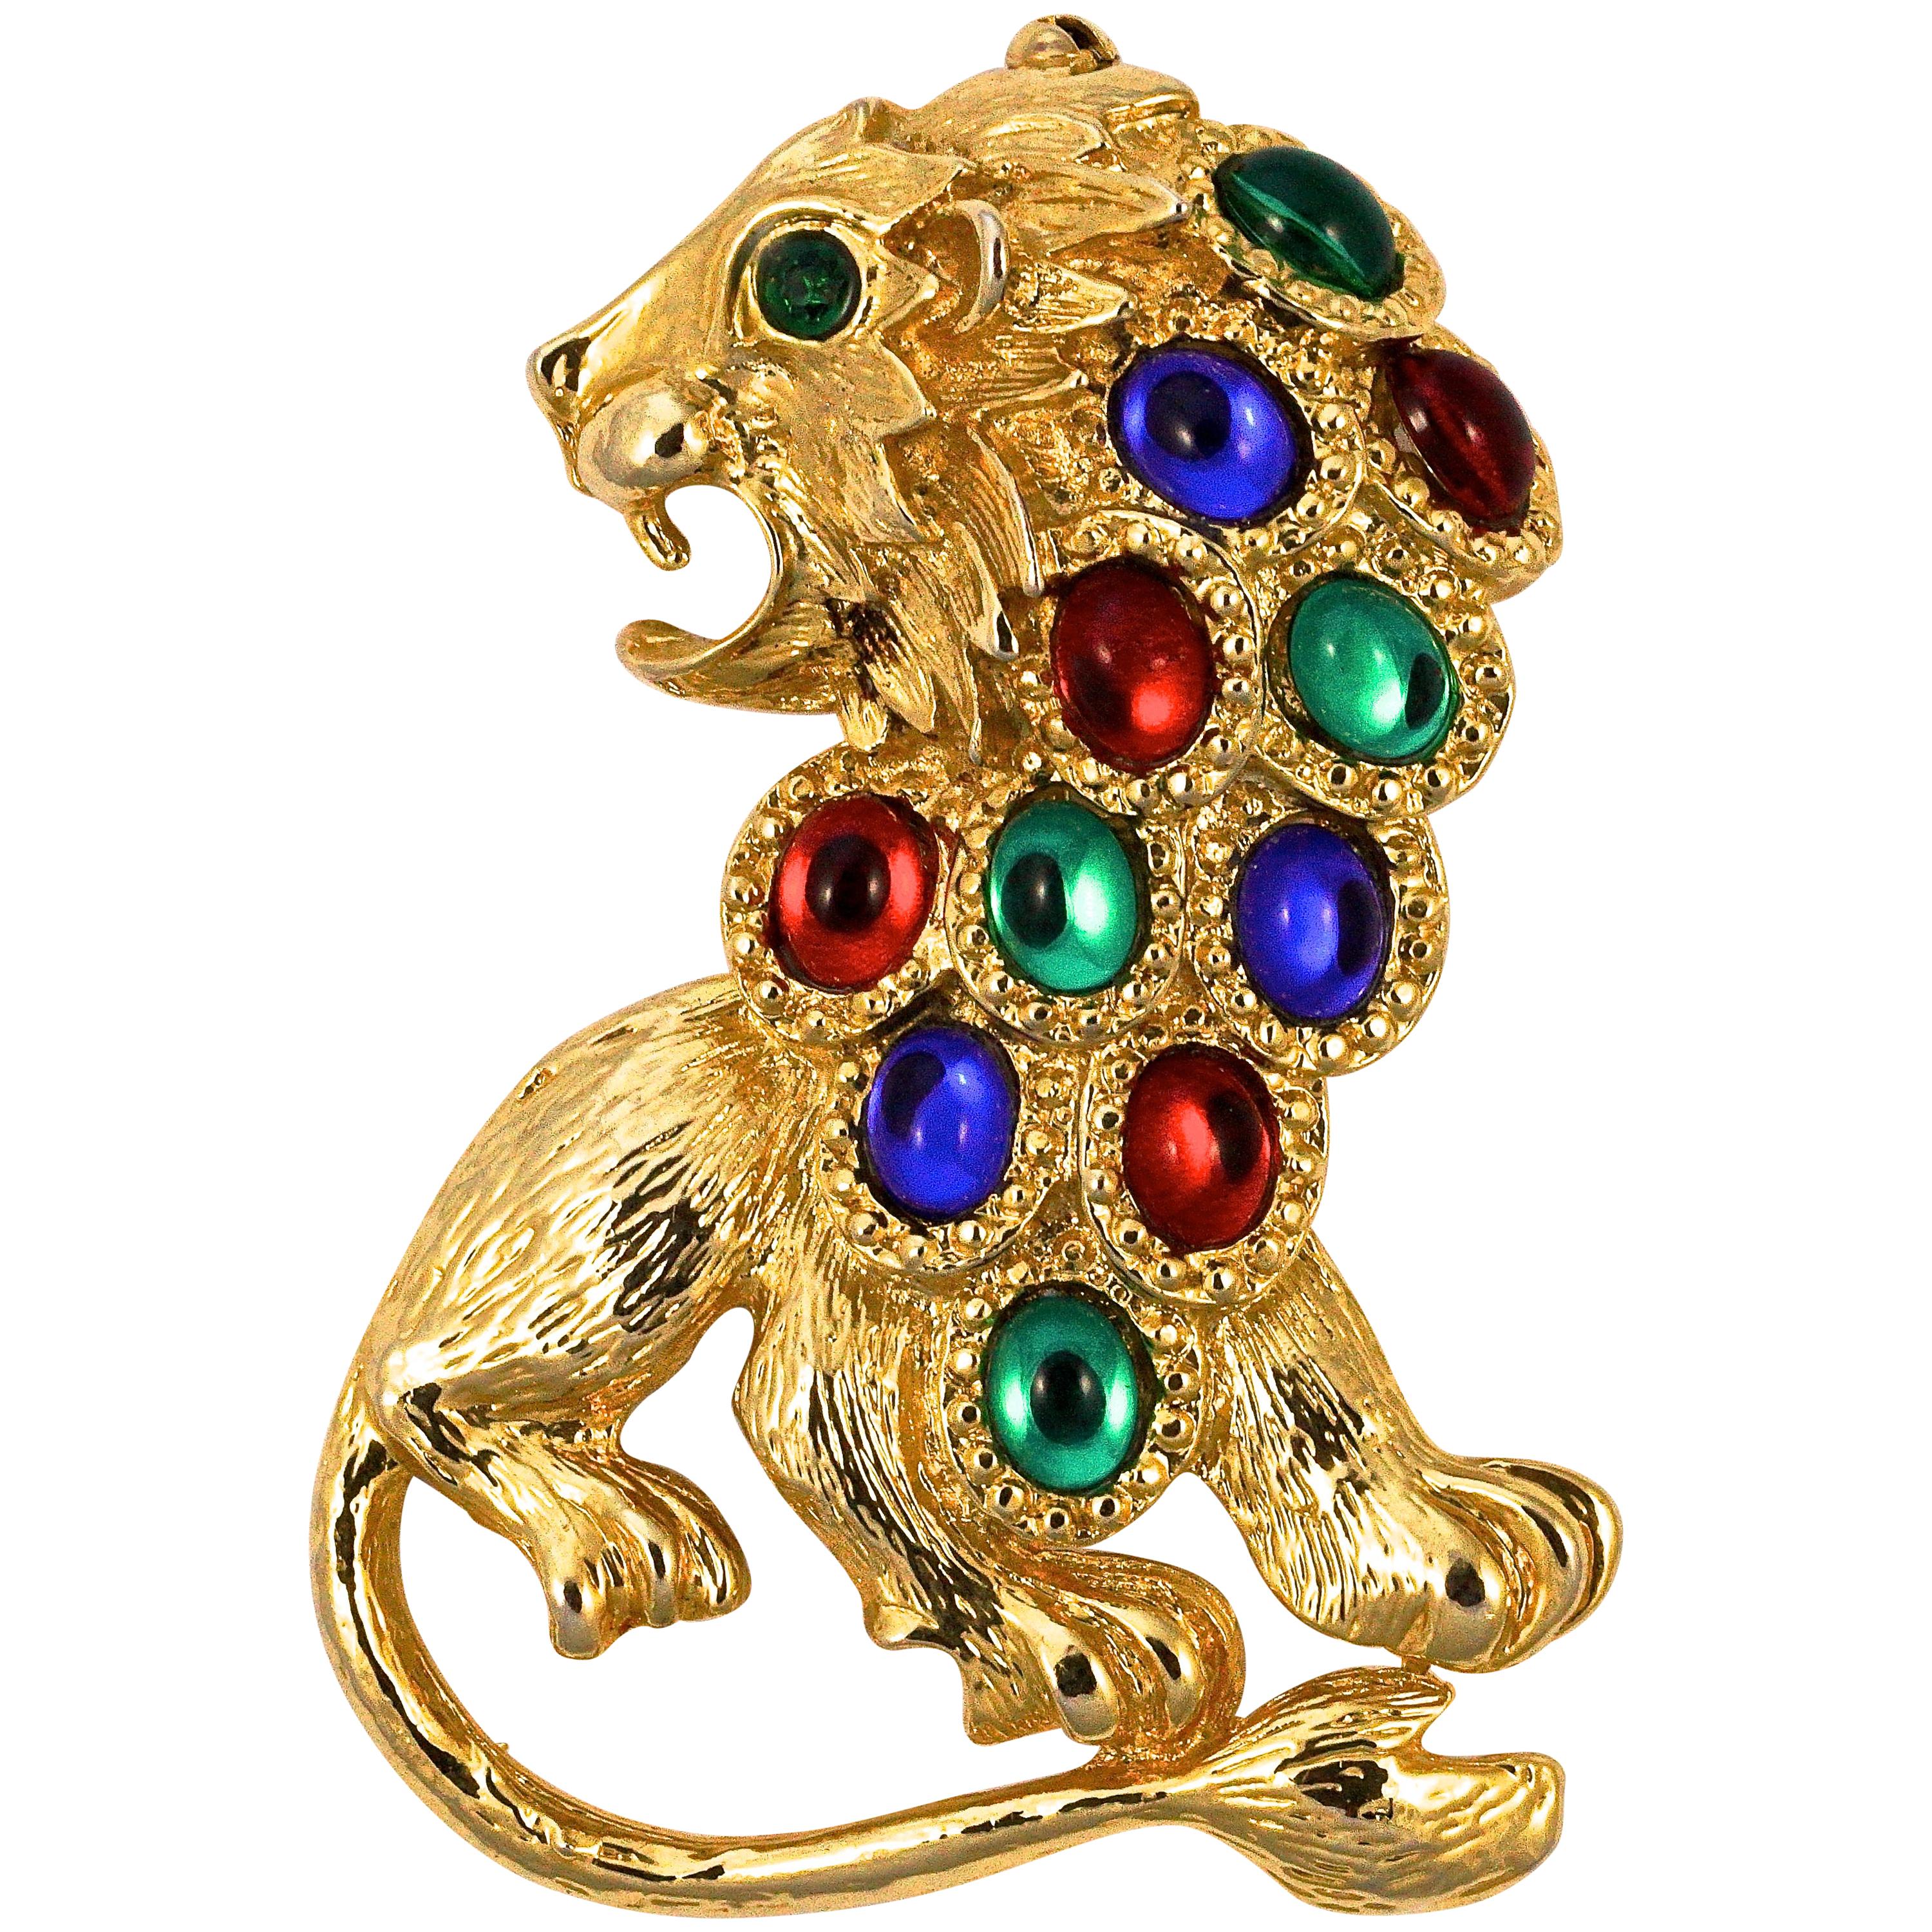 Large Gold Plated Textured Lion Statement Brooch with Blue, Red and Green Stones